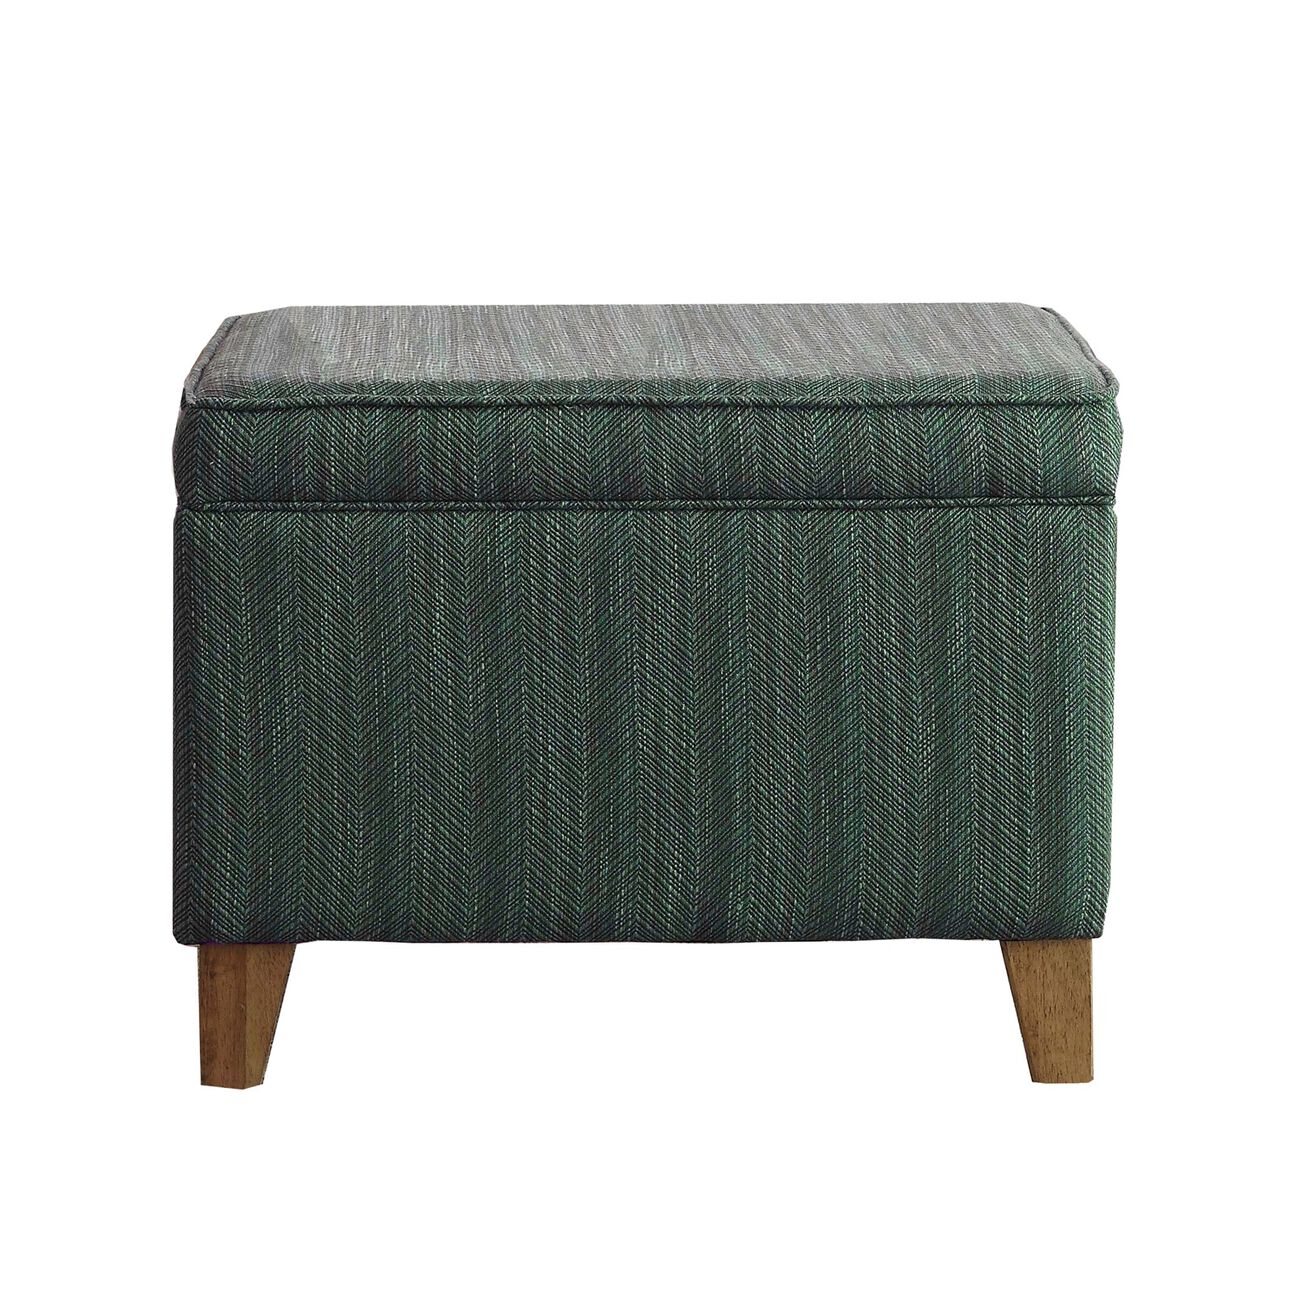 Rectangular Fabric Upholstered Wooden Ottoman with Lift Top Storage, Green